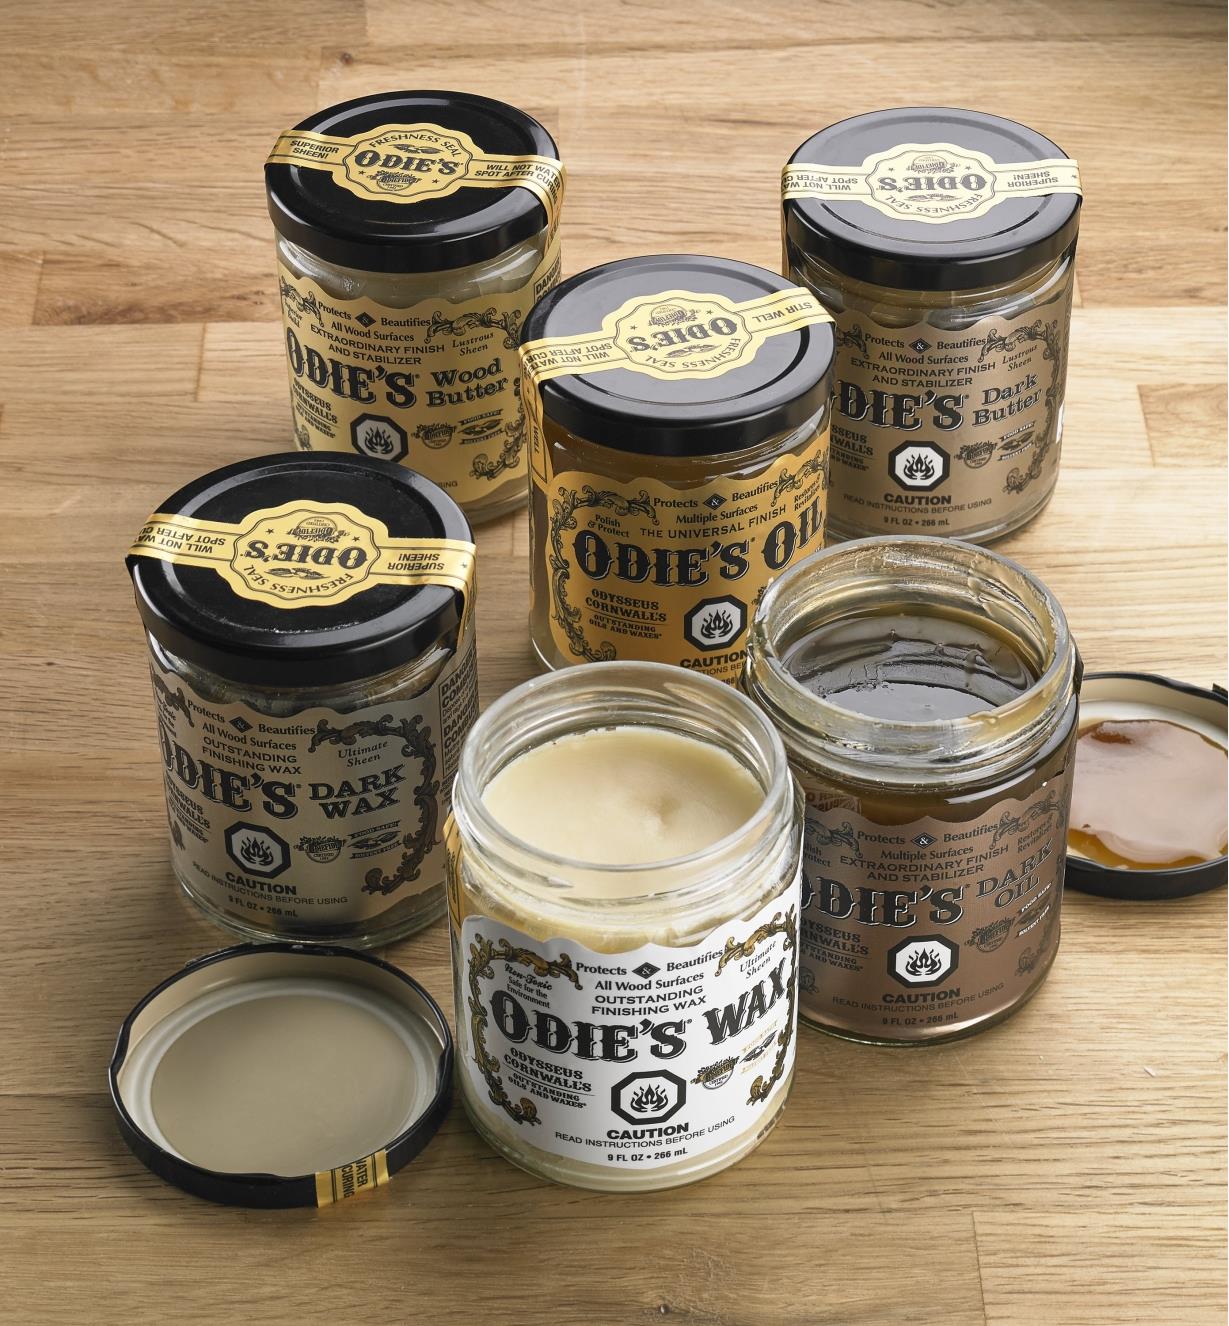 All six Odie’s Oil Finishes are on a wood surface, with two of the jars open